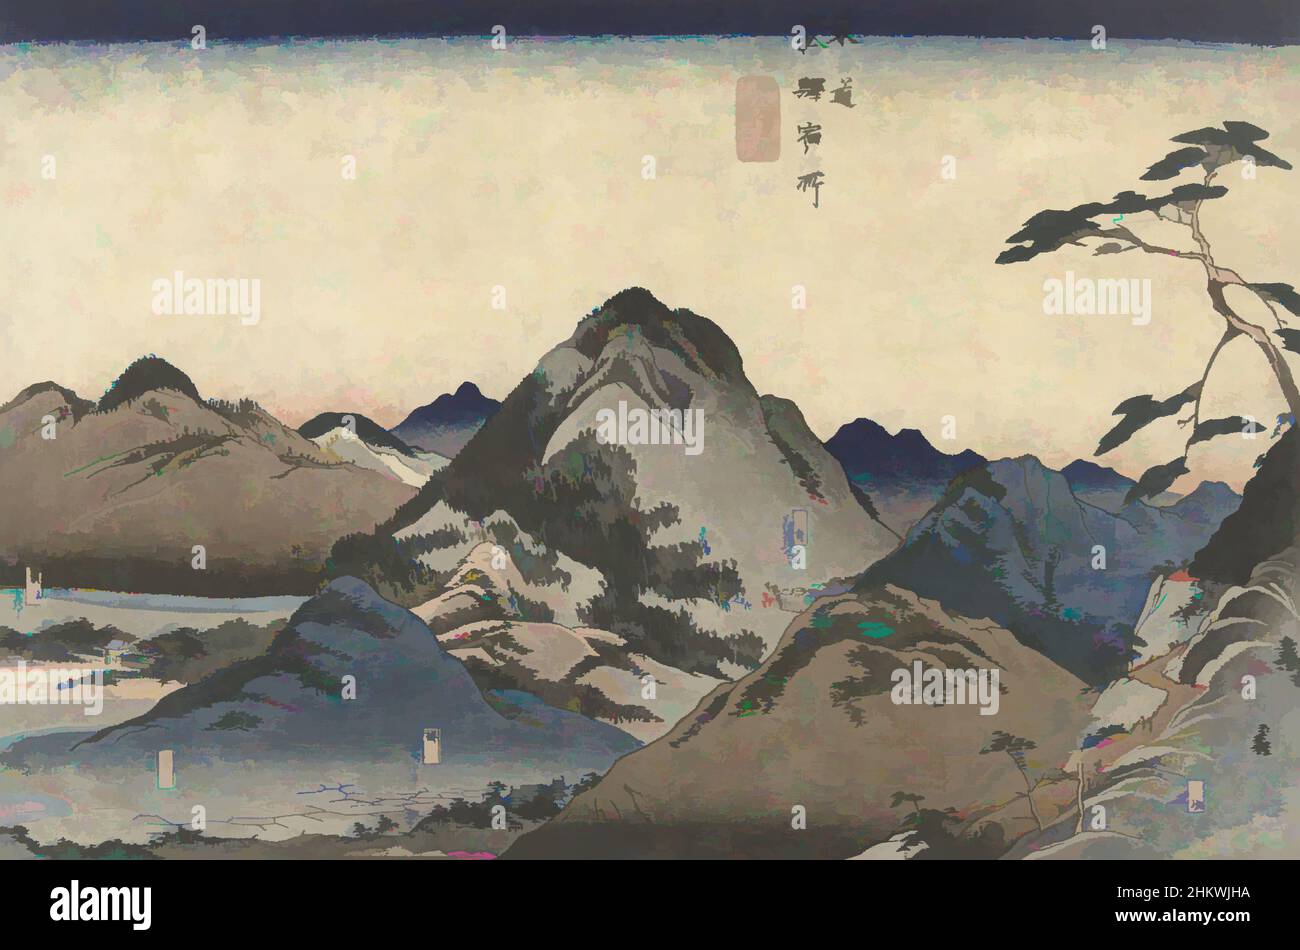 Art inspired by Nissaka to Hamamatsu, Several famous places along the Tokaido at the same time (series title), Tokaido gojusan eki goshuku meisho, Mountain landscape with the names of several stations along the Tokaido road in red cartouches; in the foreground on the right travelers on, Classic works modernized by Artotop with a splash of modernity. Shapes, color and value, eye-catching visual impact on art. Emotions through freedom of artworks in a contemporary way. A timeless message pursuing a wildly creative new direction. Artists turning to the digital medium and creating the Artotop NFT Stock Photo